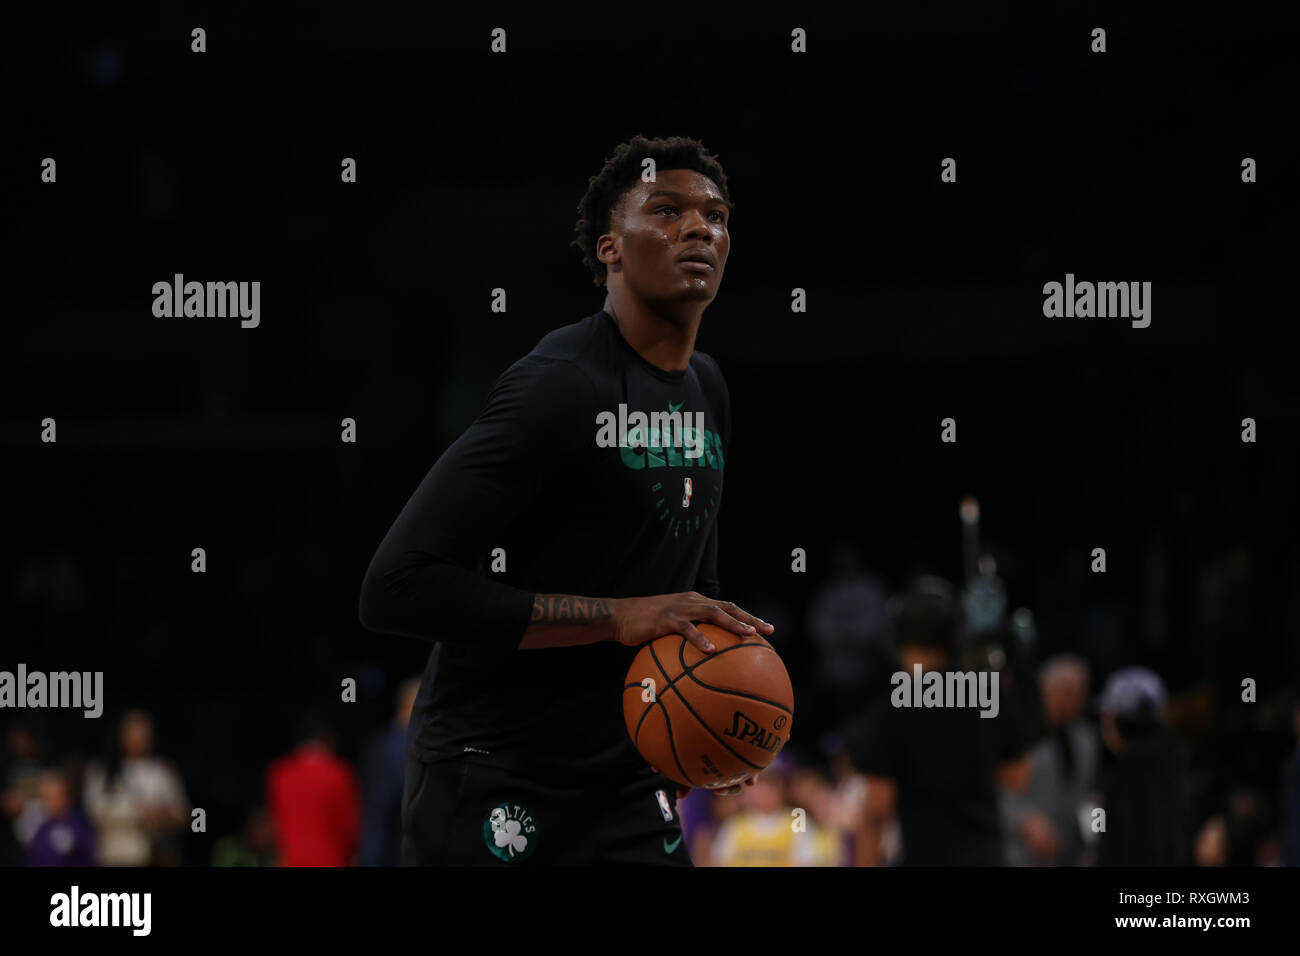 Boston Celtics center Robert Williams III #44 during the Boston Celtics vs Los Angeles Lakers game at Staples Center in Los Angeles, CA on March 09, 2019. (Photo by Jevone Moore) Stock Photo